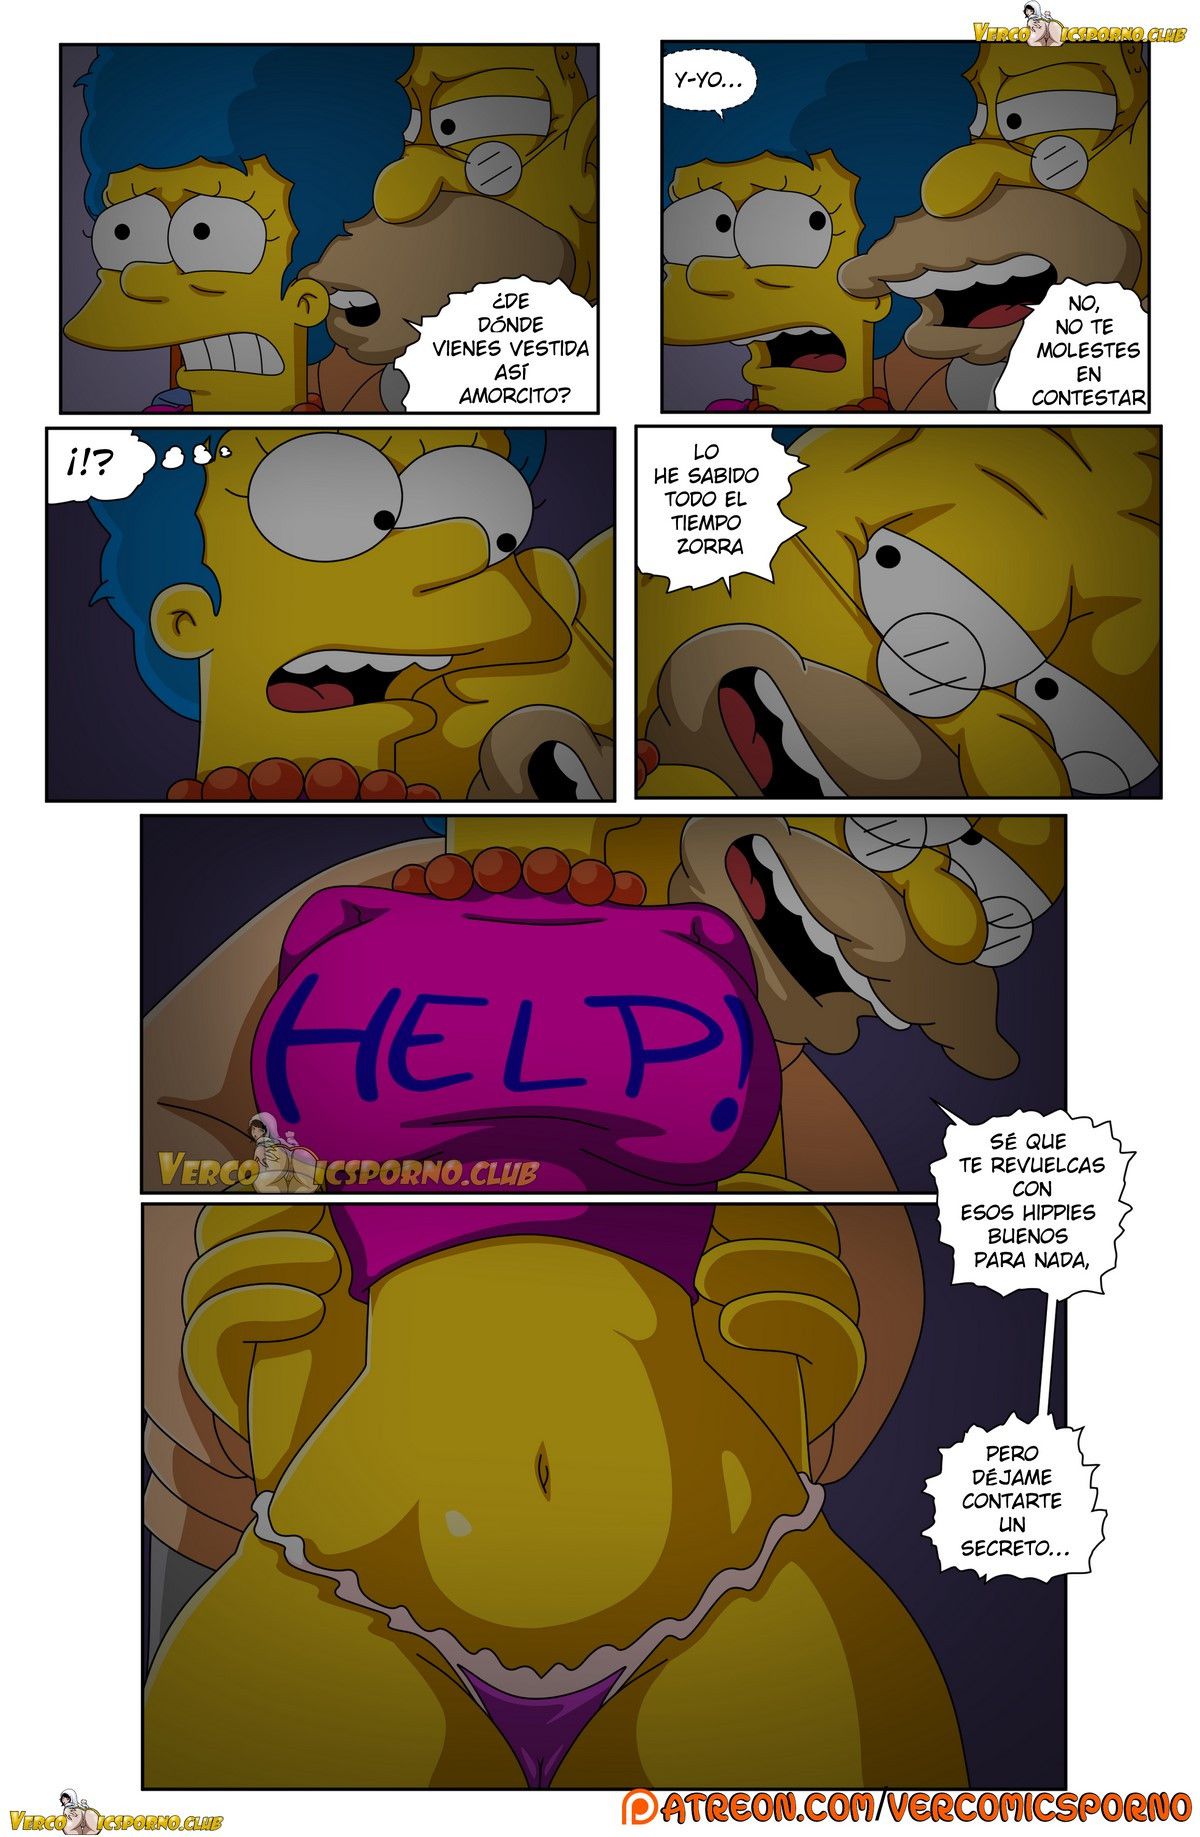 Grandpa and me - [Itooneaxxx] - [Drah Navlag] - [VCP] - [The Simpsons] 54